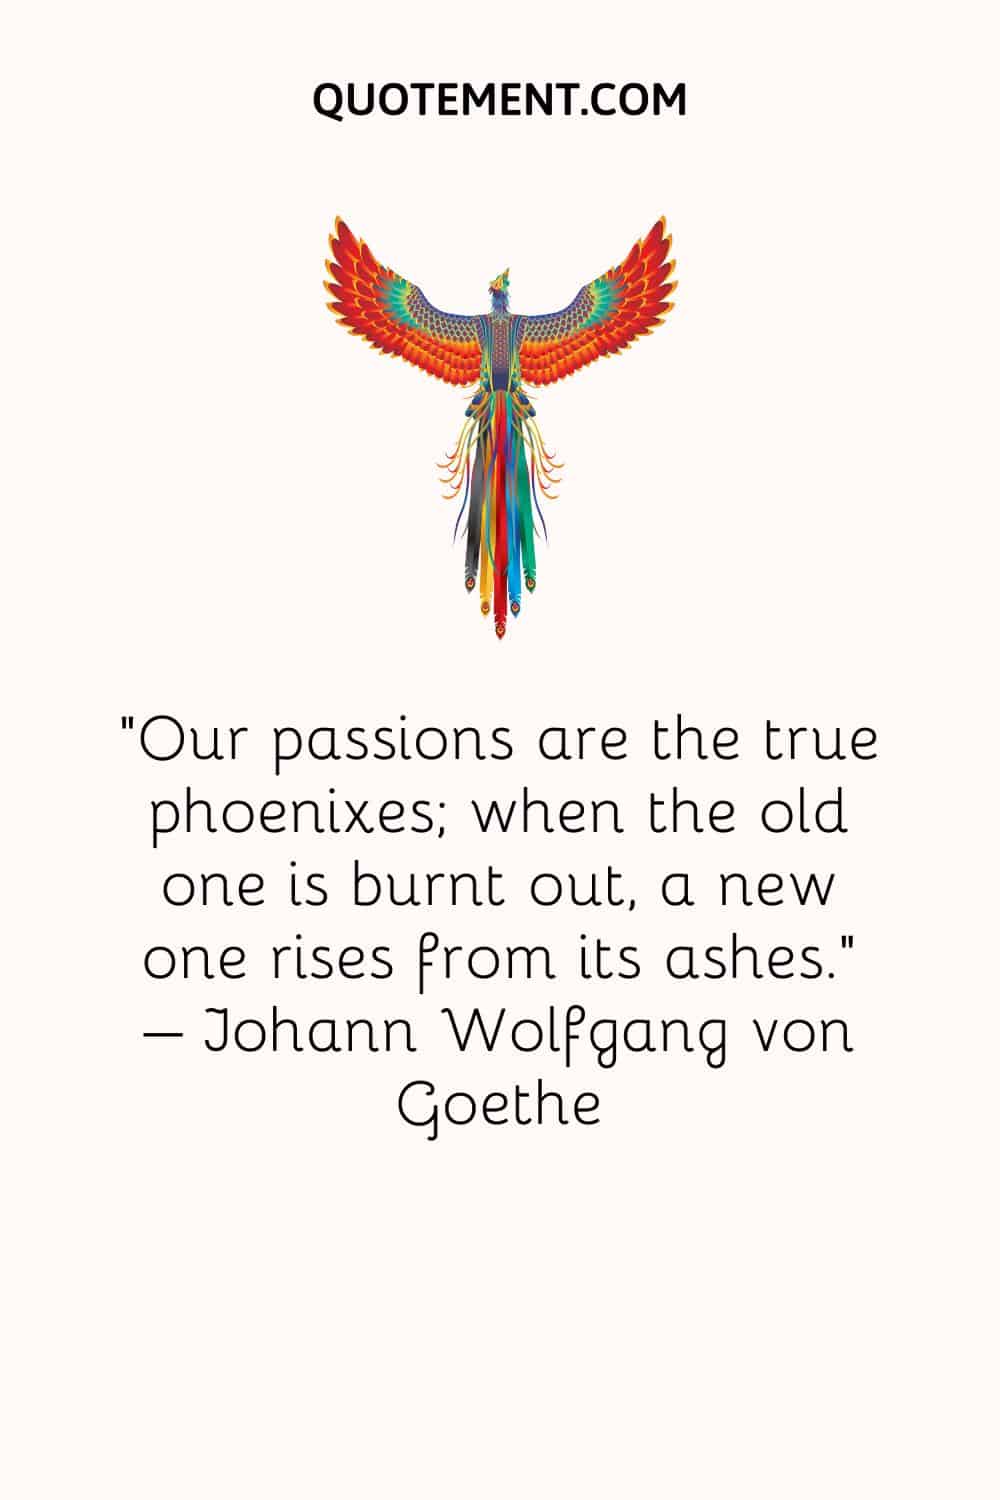 Our passions are the true phoenixes; when the old one is burnt out, a new one rises from its ashes